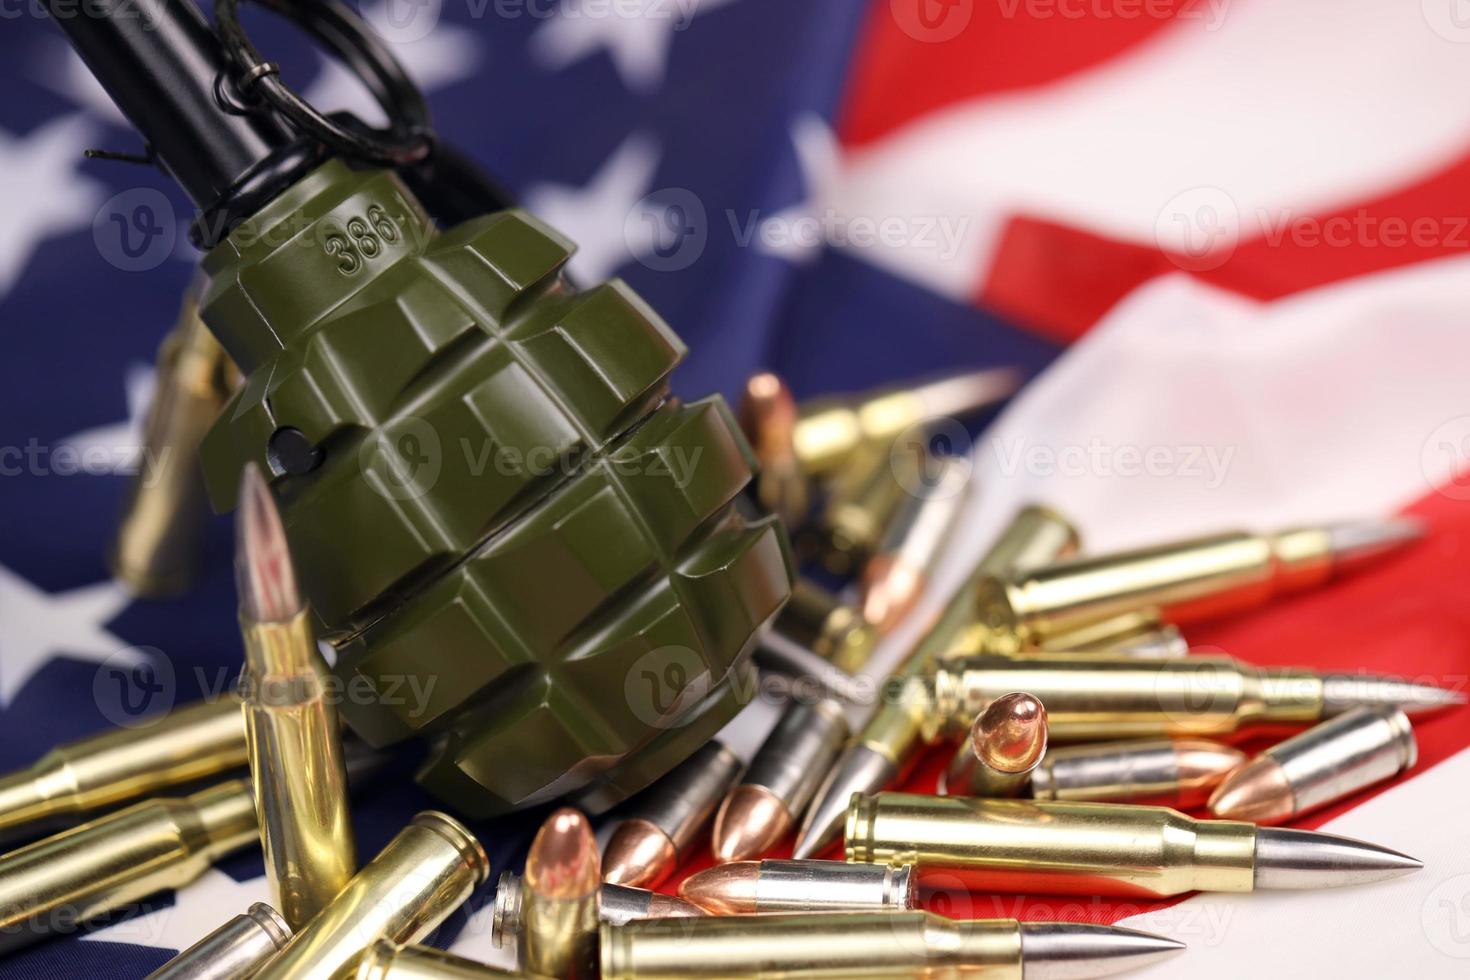 F1 frag grenade and many yellow bullets and cartridges on United States flag. Concept of gun trafficking on USA territory or spec ops photo